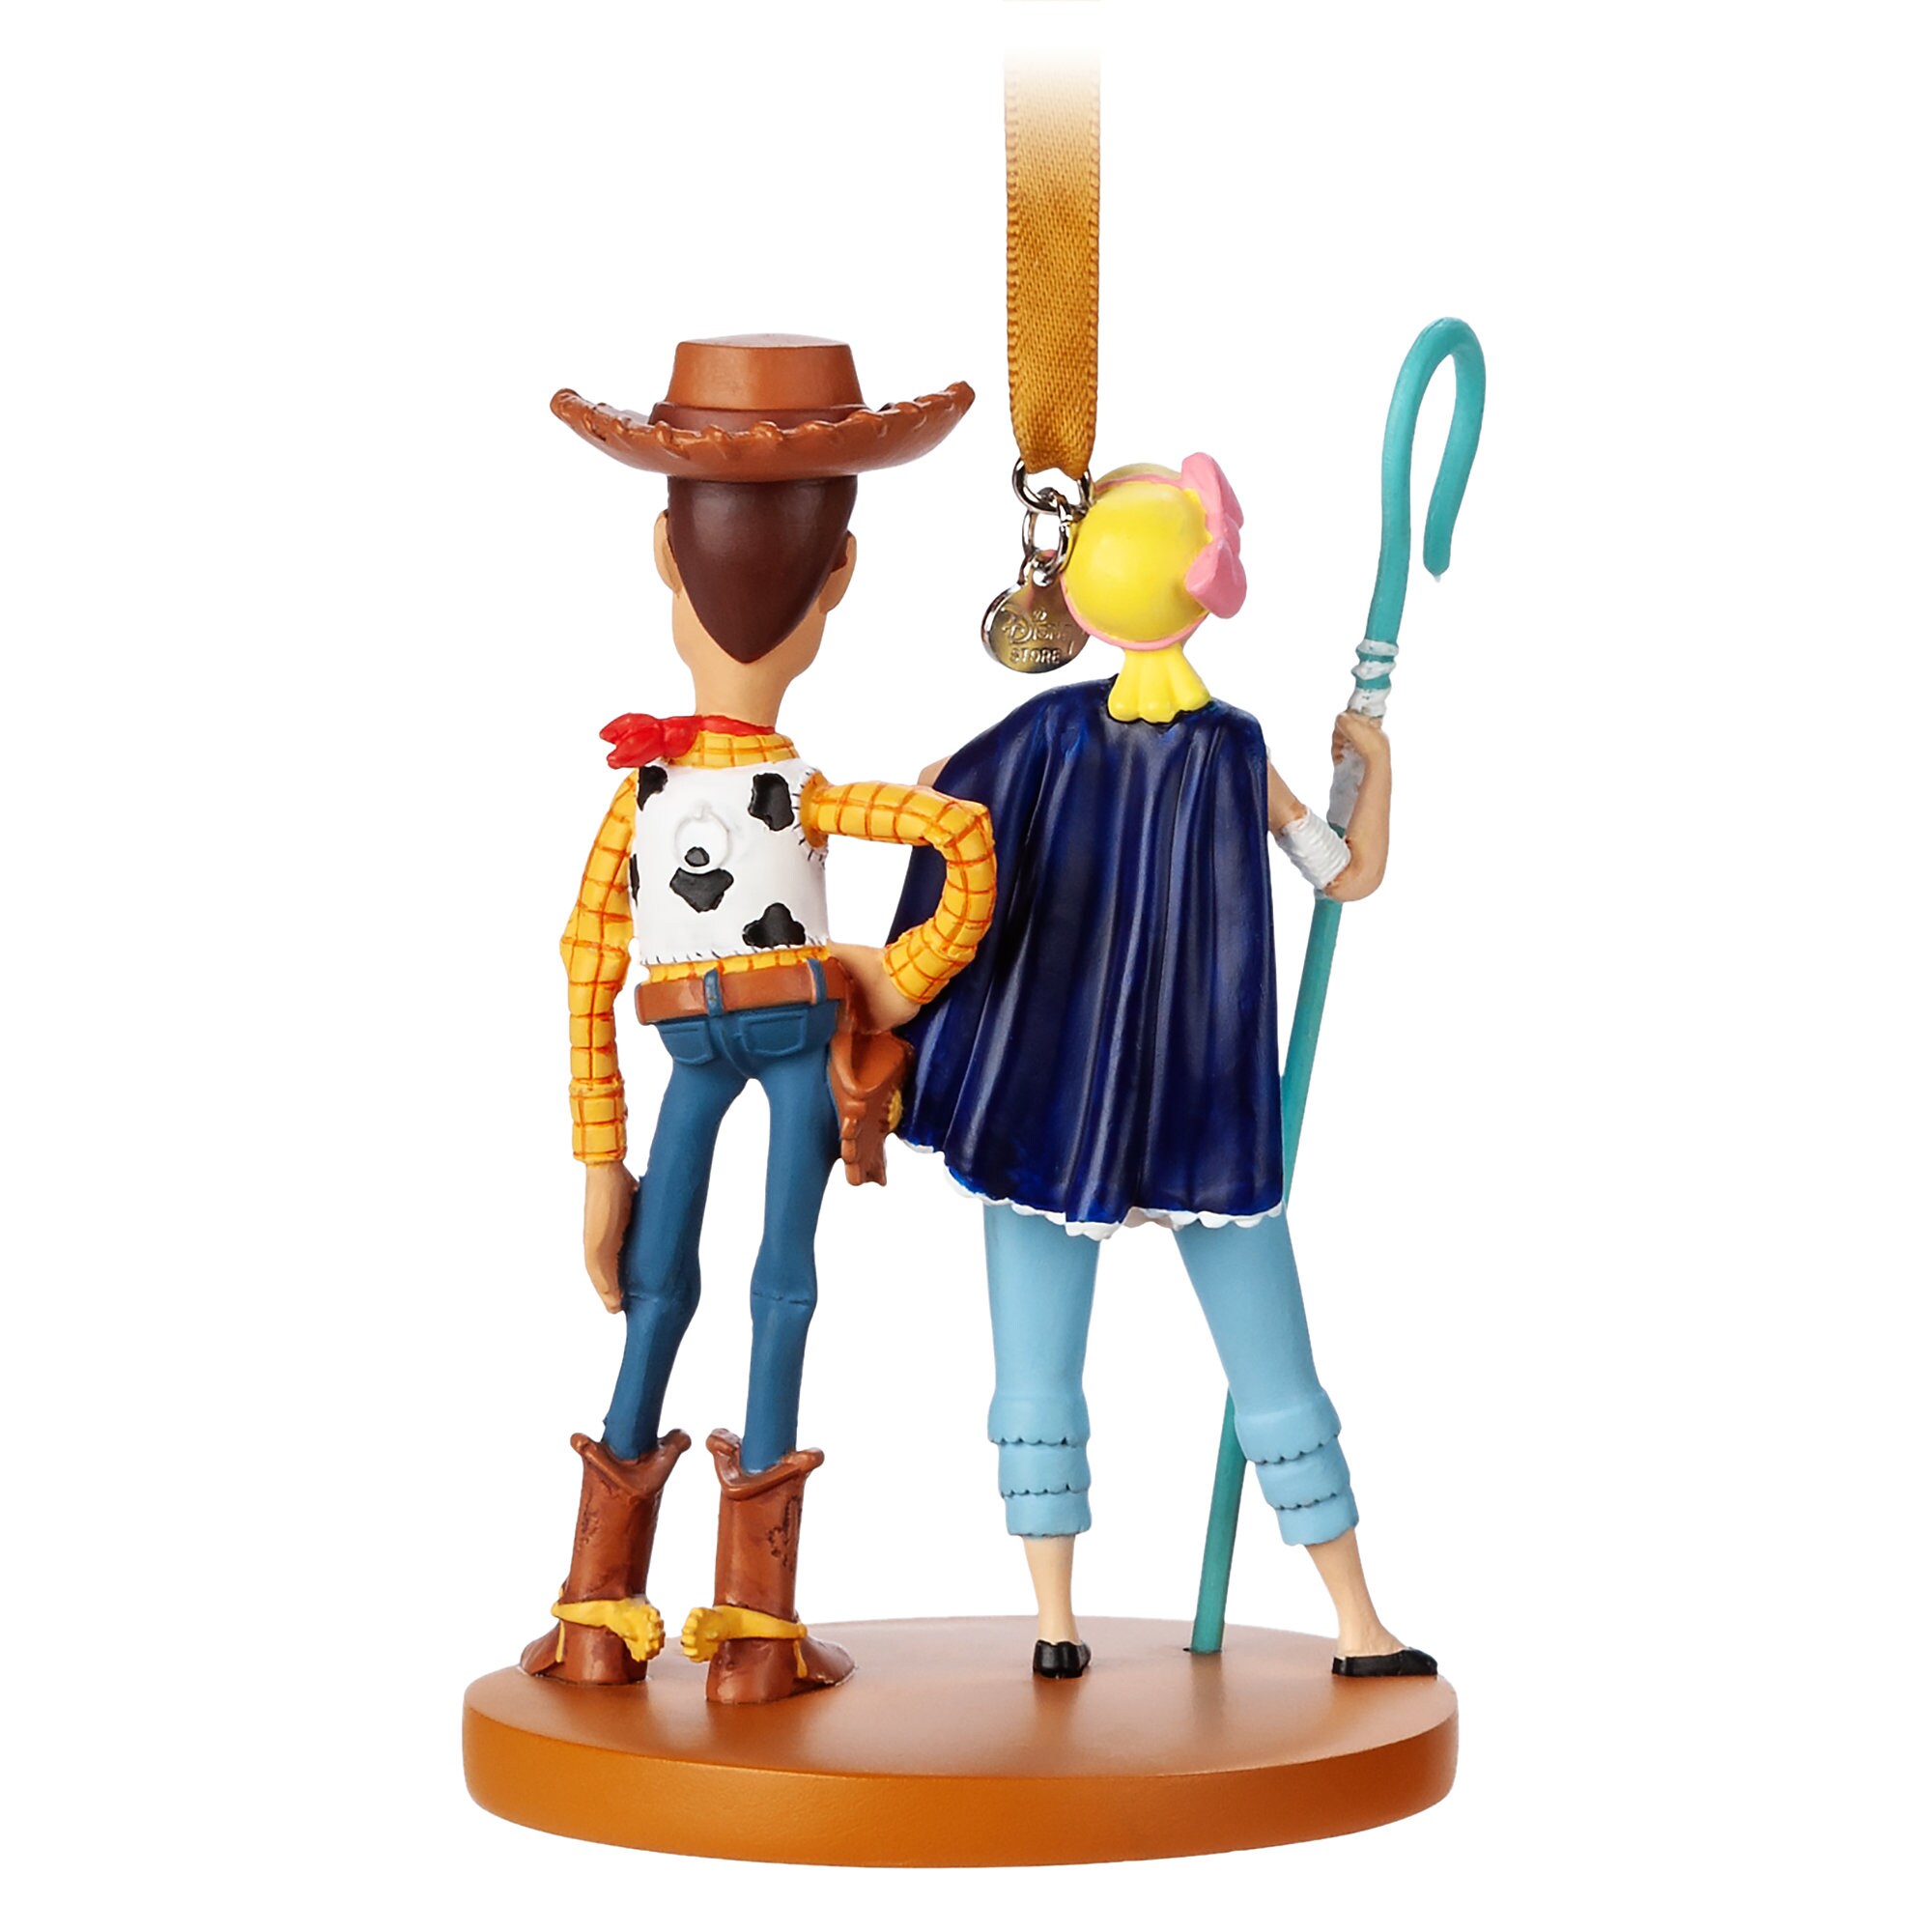 Woody and Bo Peep Sketchbook Ornament - Toy Story 4